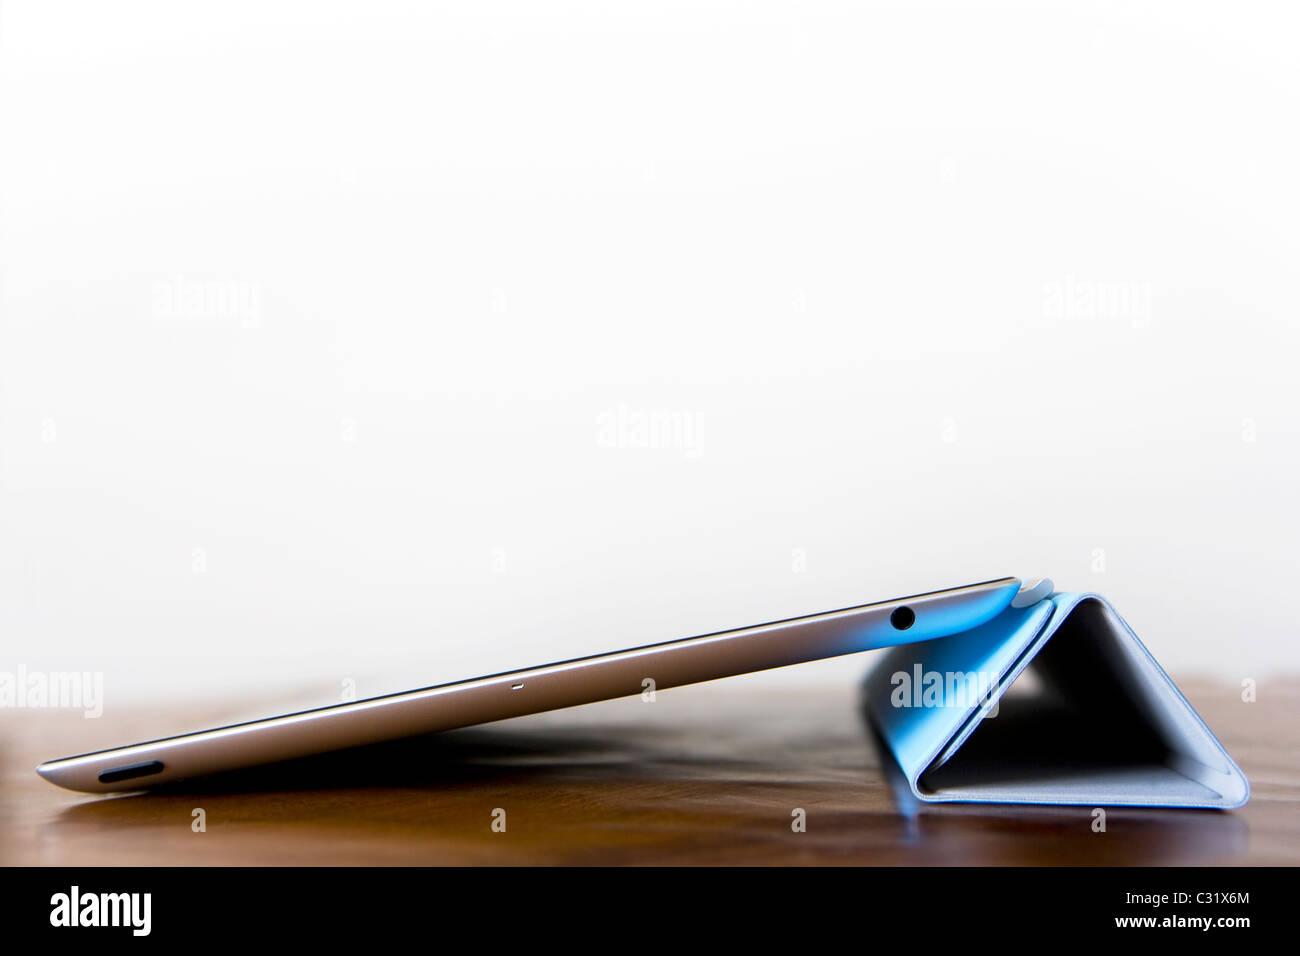 An iPad 2 using the smart cover as a stand Stock Photo